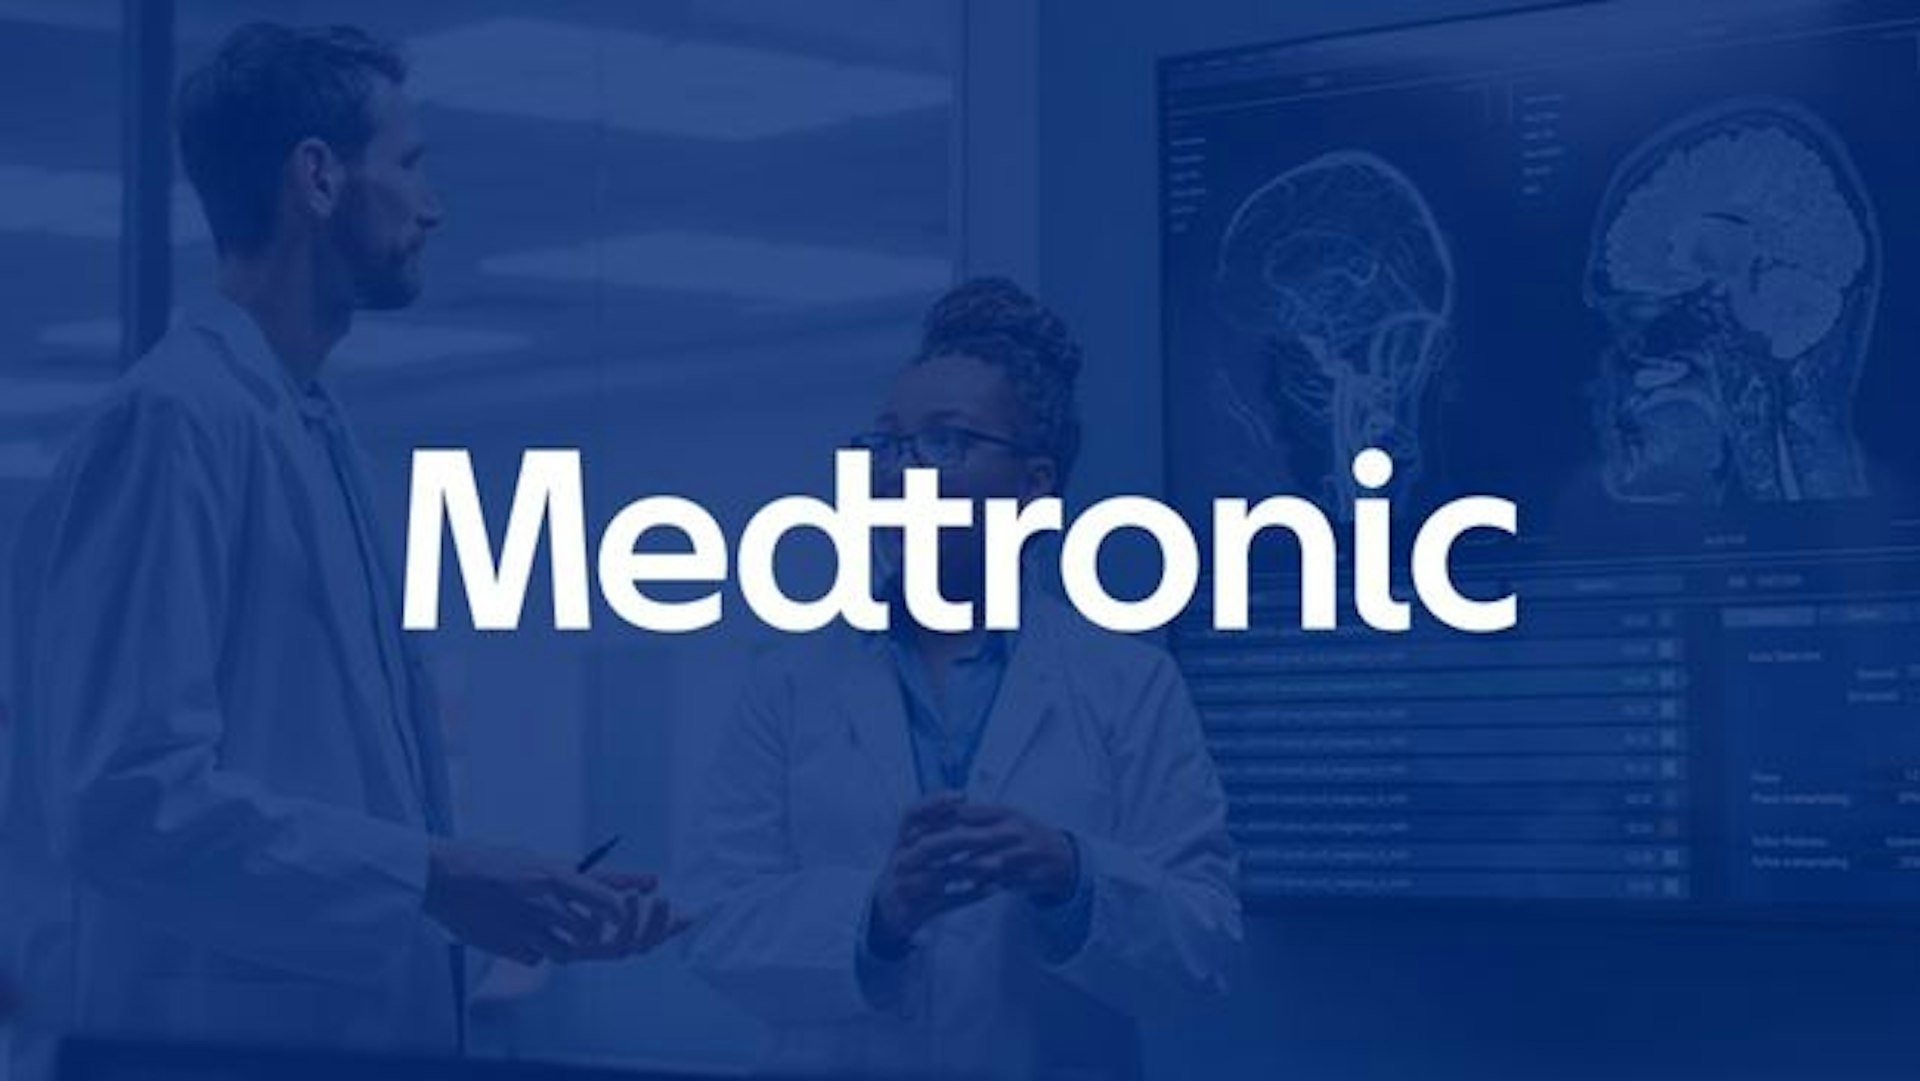 How Medtronic Simplified their Data Protection Strategy